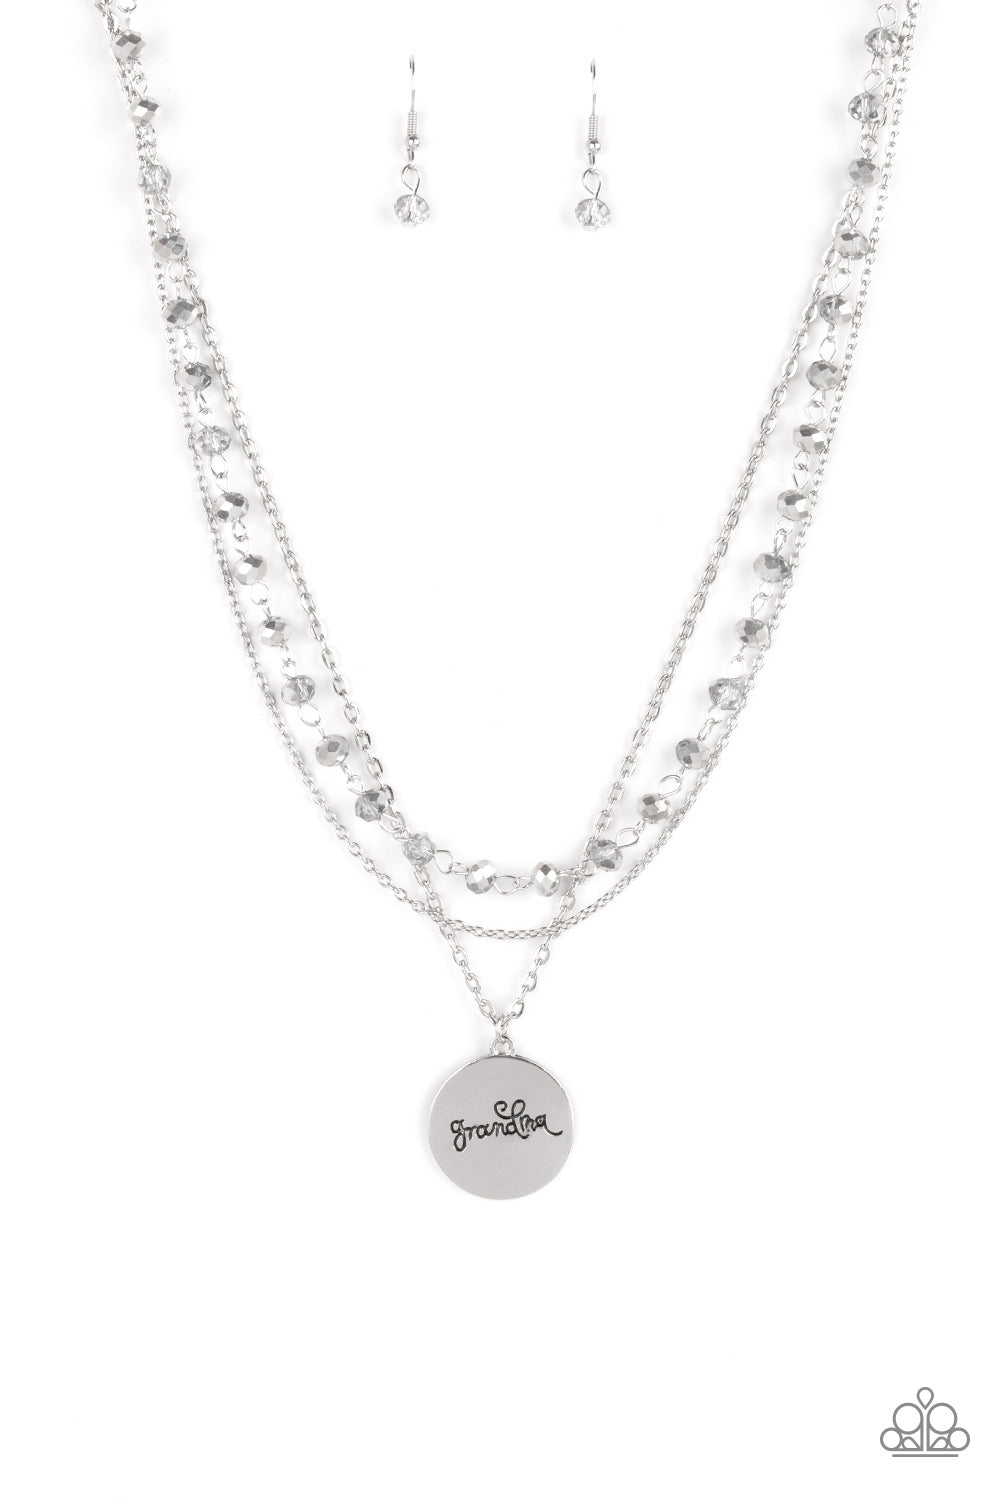 Paparazzi ♥ Promoted to Grandma - Silver ♥ Necklace